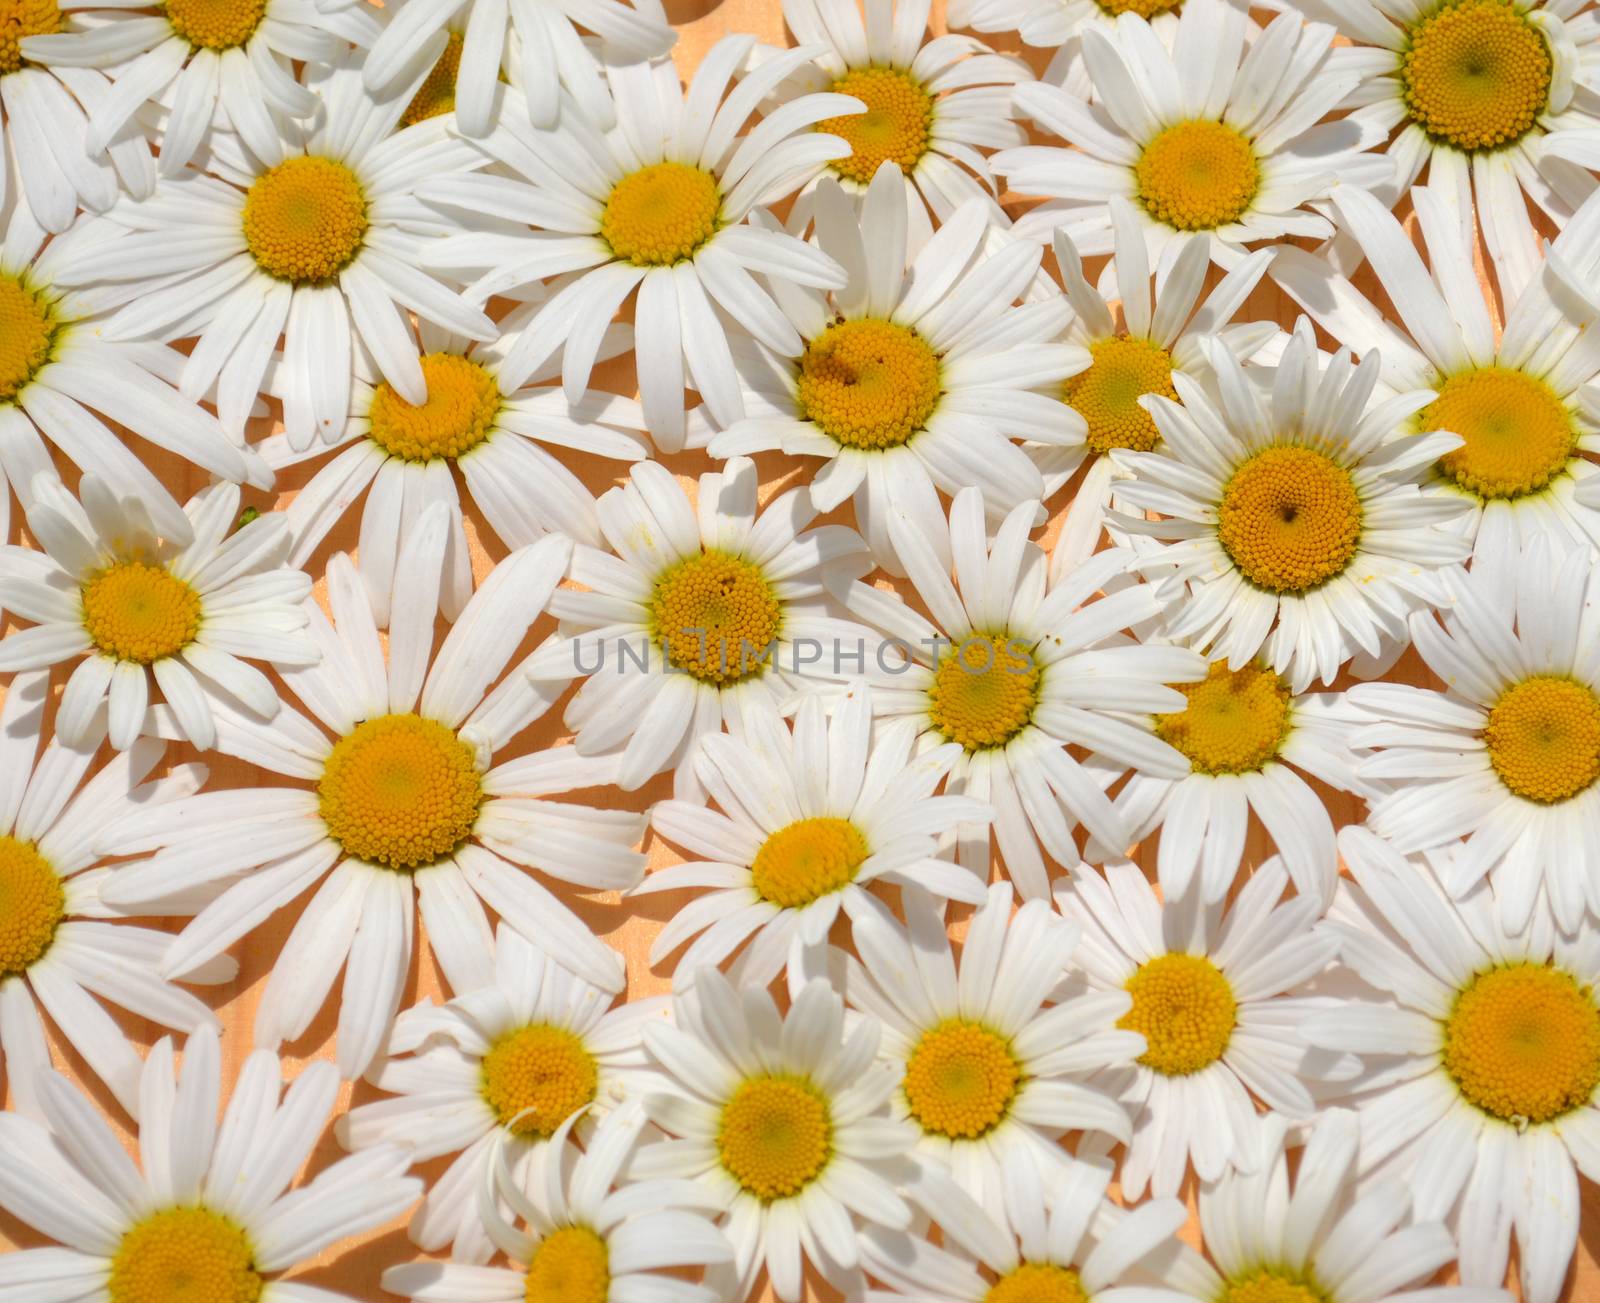 Bunch of daisy flowers as a background by hibrida13